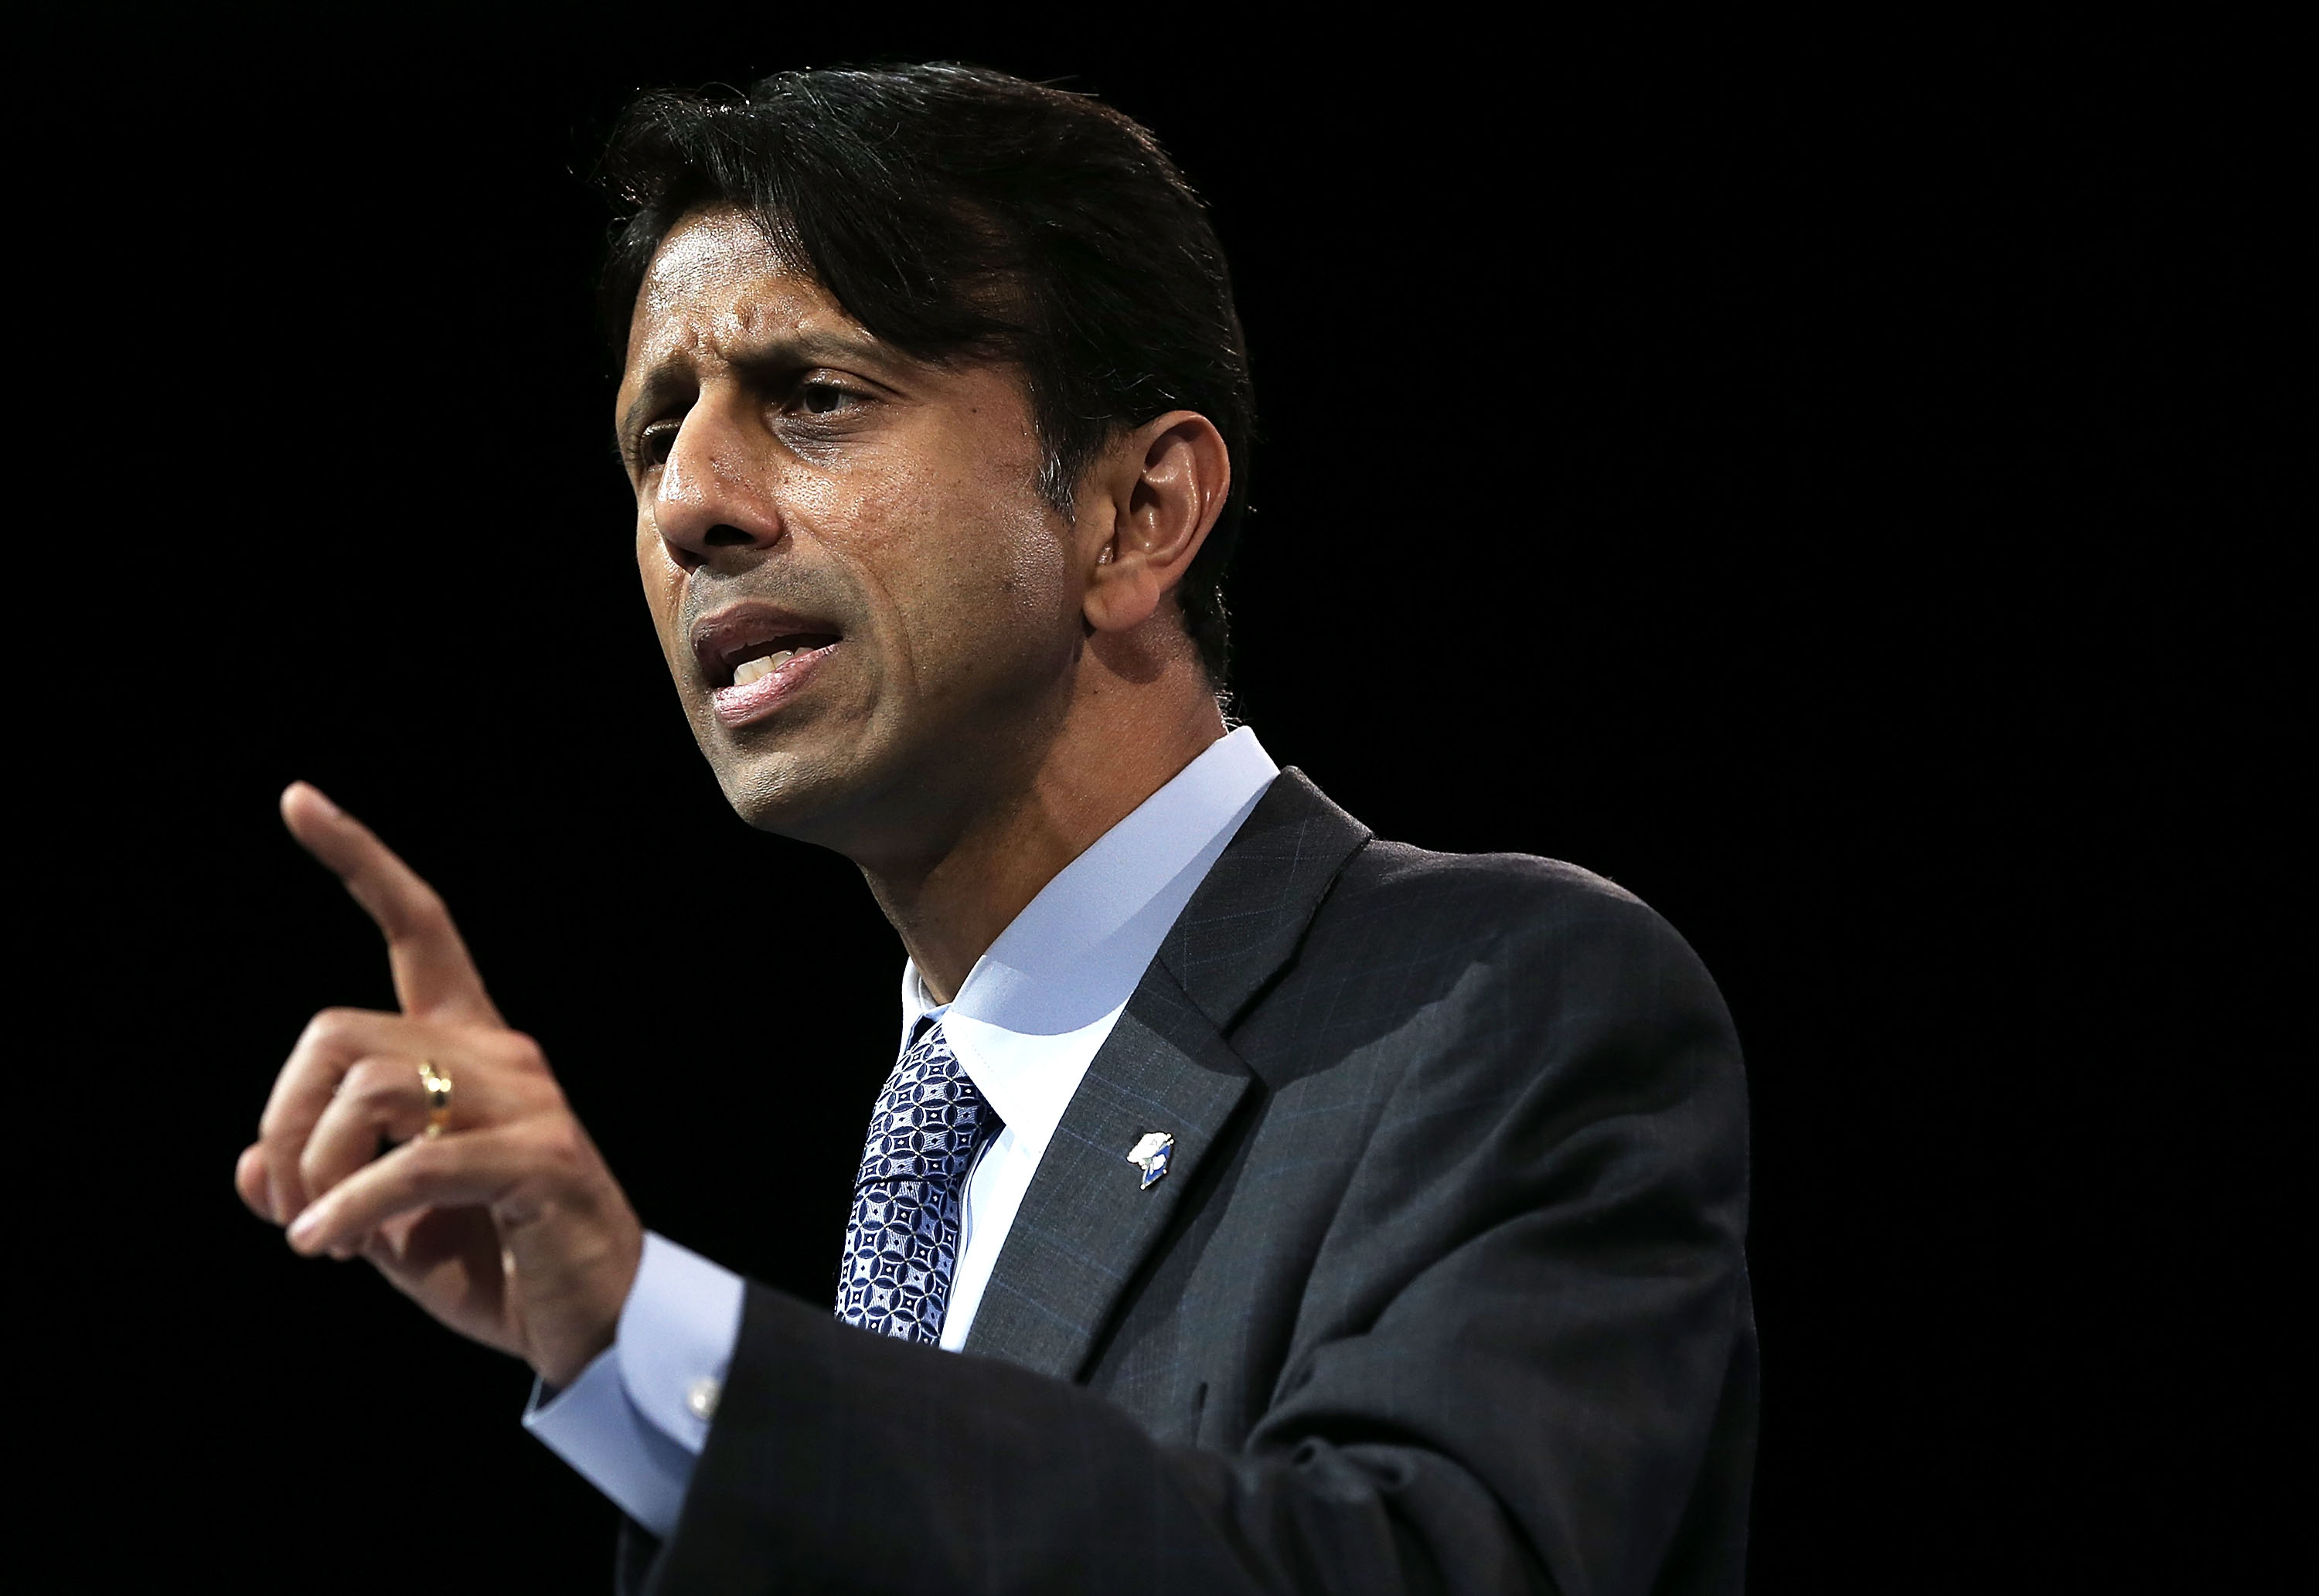 Louisiana Governor Bobby Jindal delivers remarks during the second day of the 40th annual Conservative Political Action Conference (CPAC) March 15, 2013 in National Harbor, Md. (Alex Wong&mdash;Getty Images)